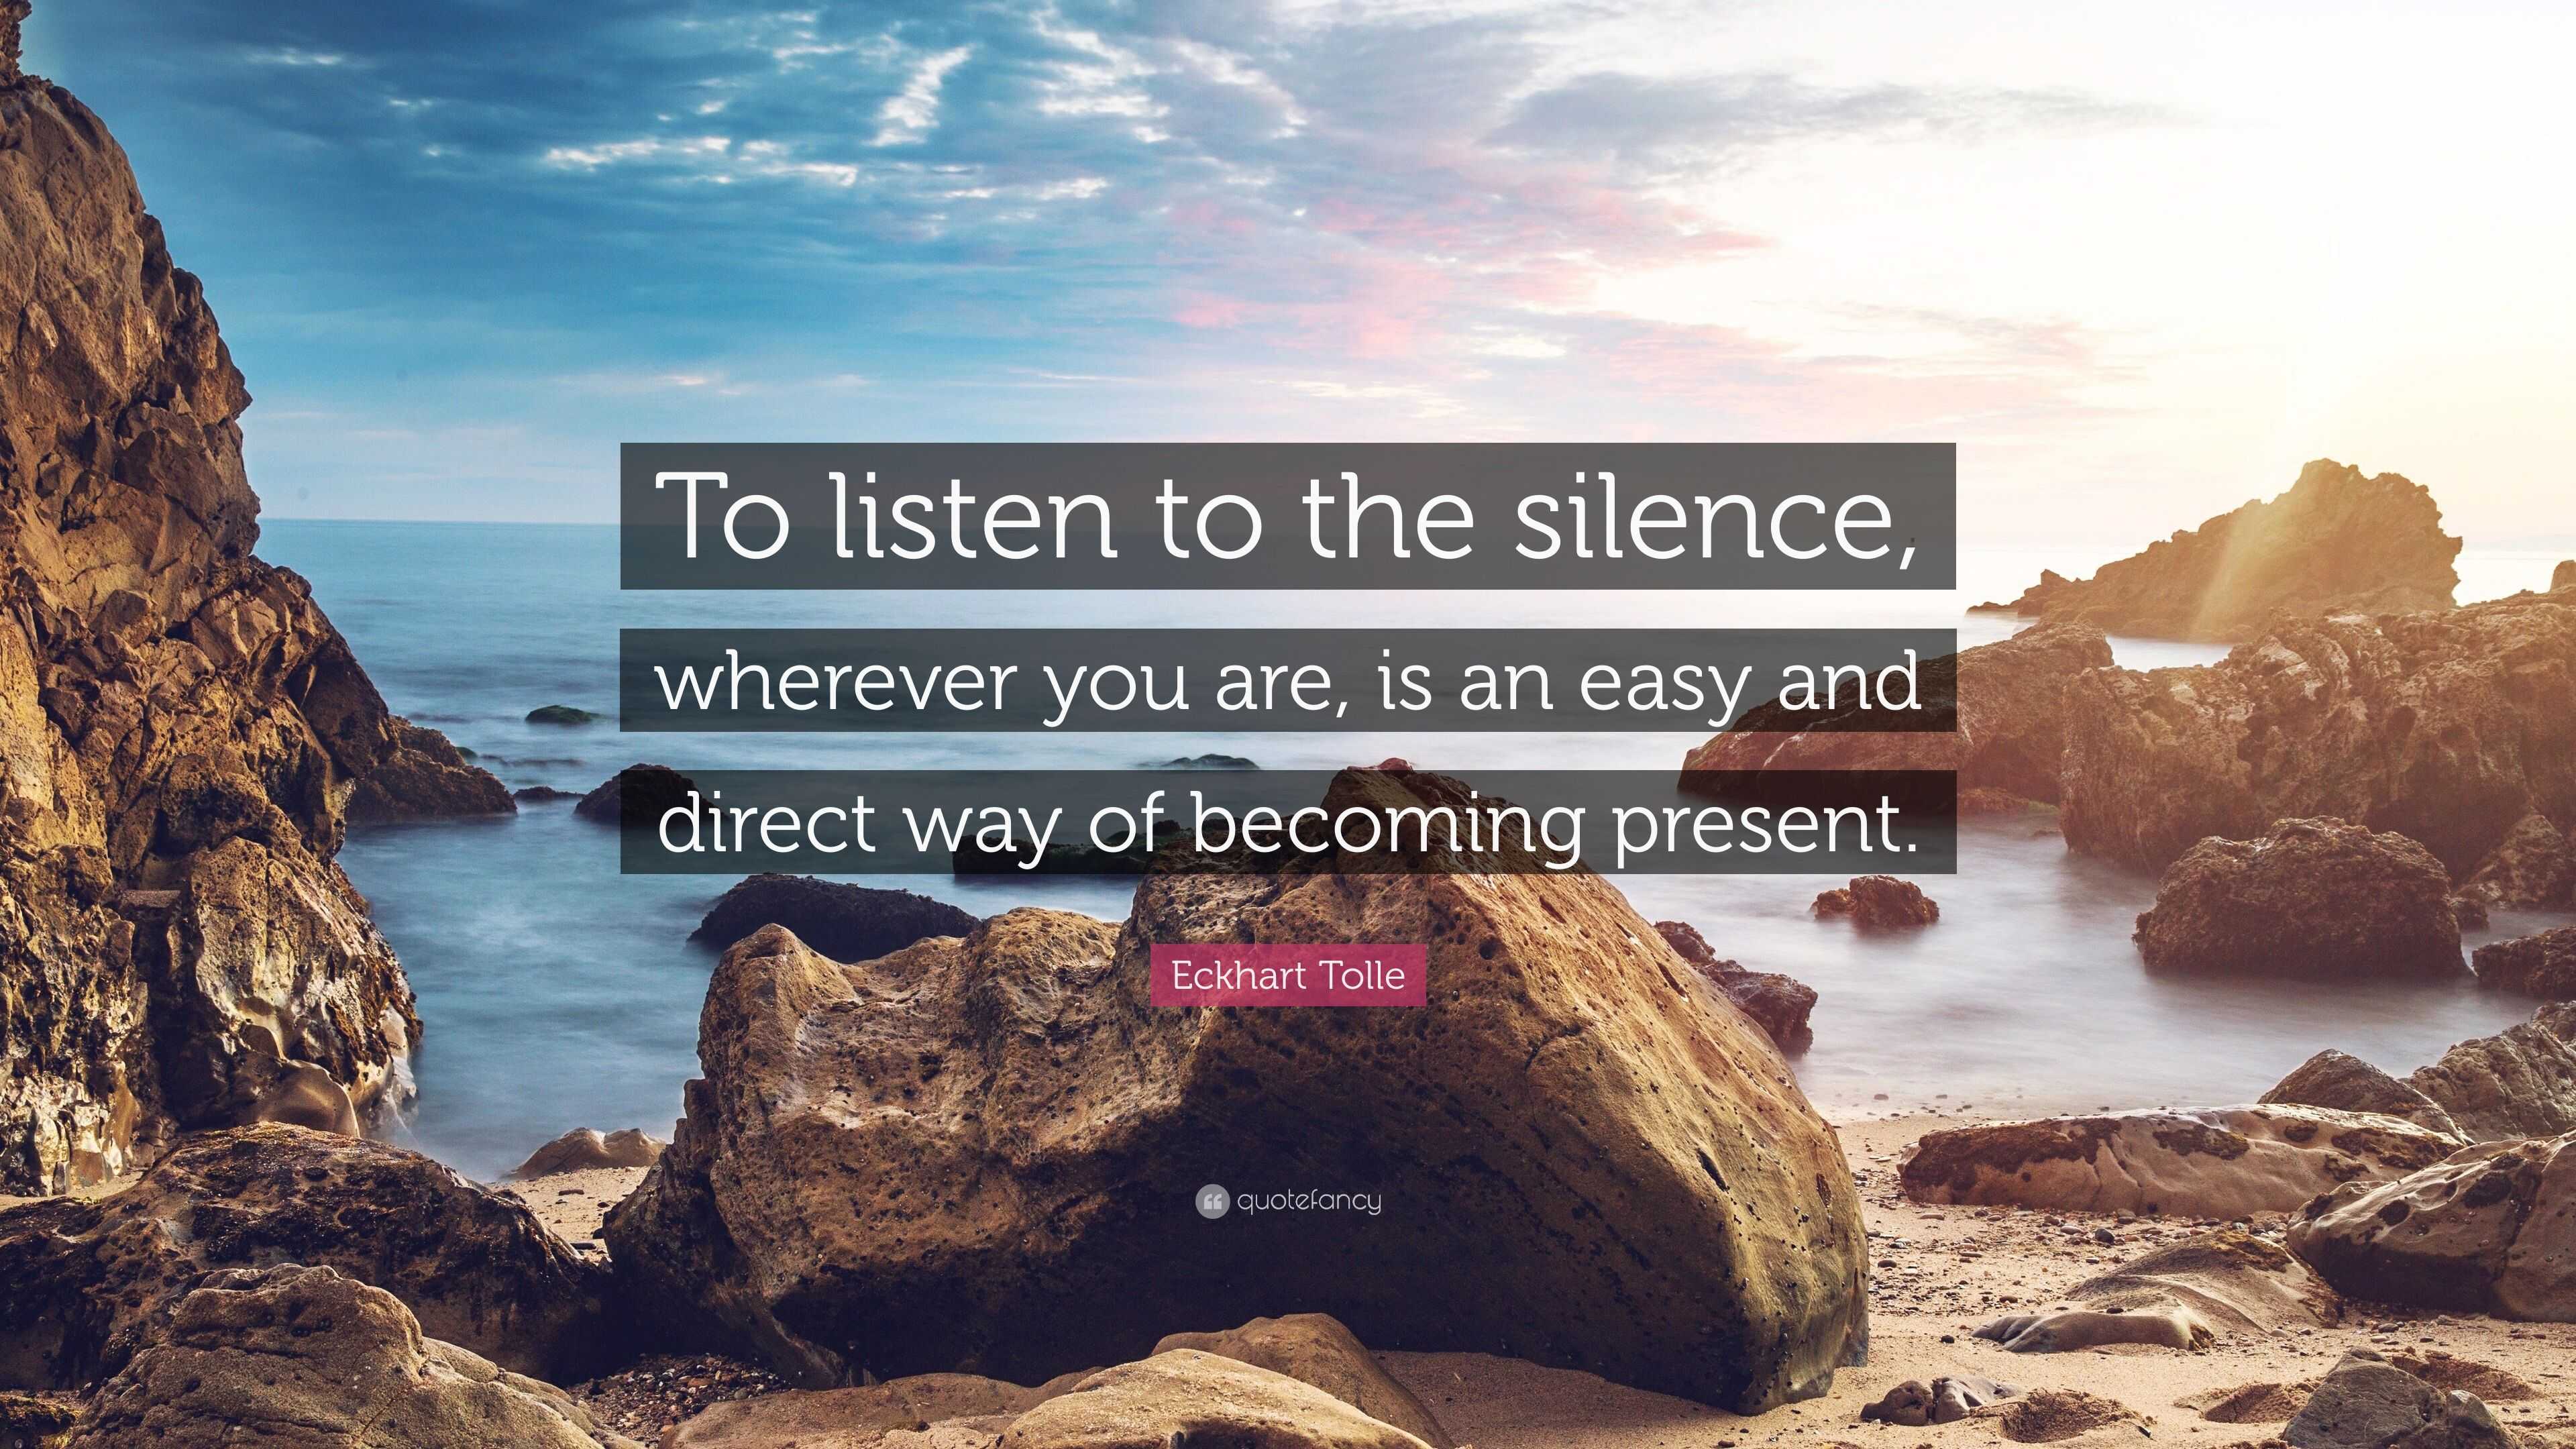 Eckhart Tolle Quote: “To listen to the silence, wherever you are, is an ...